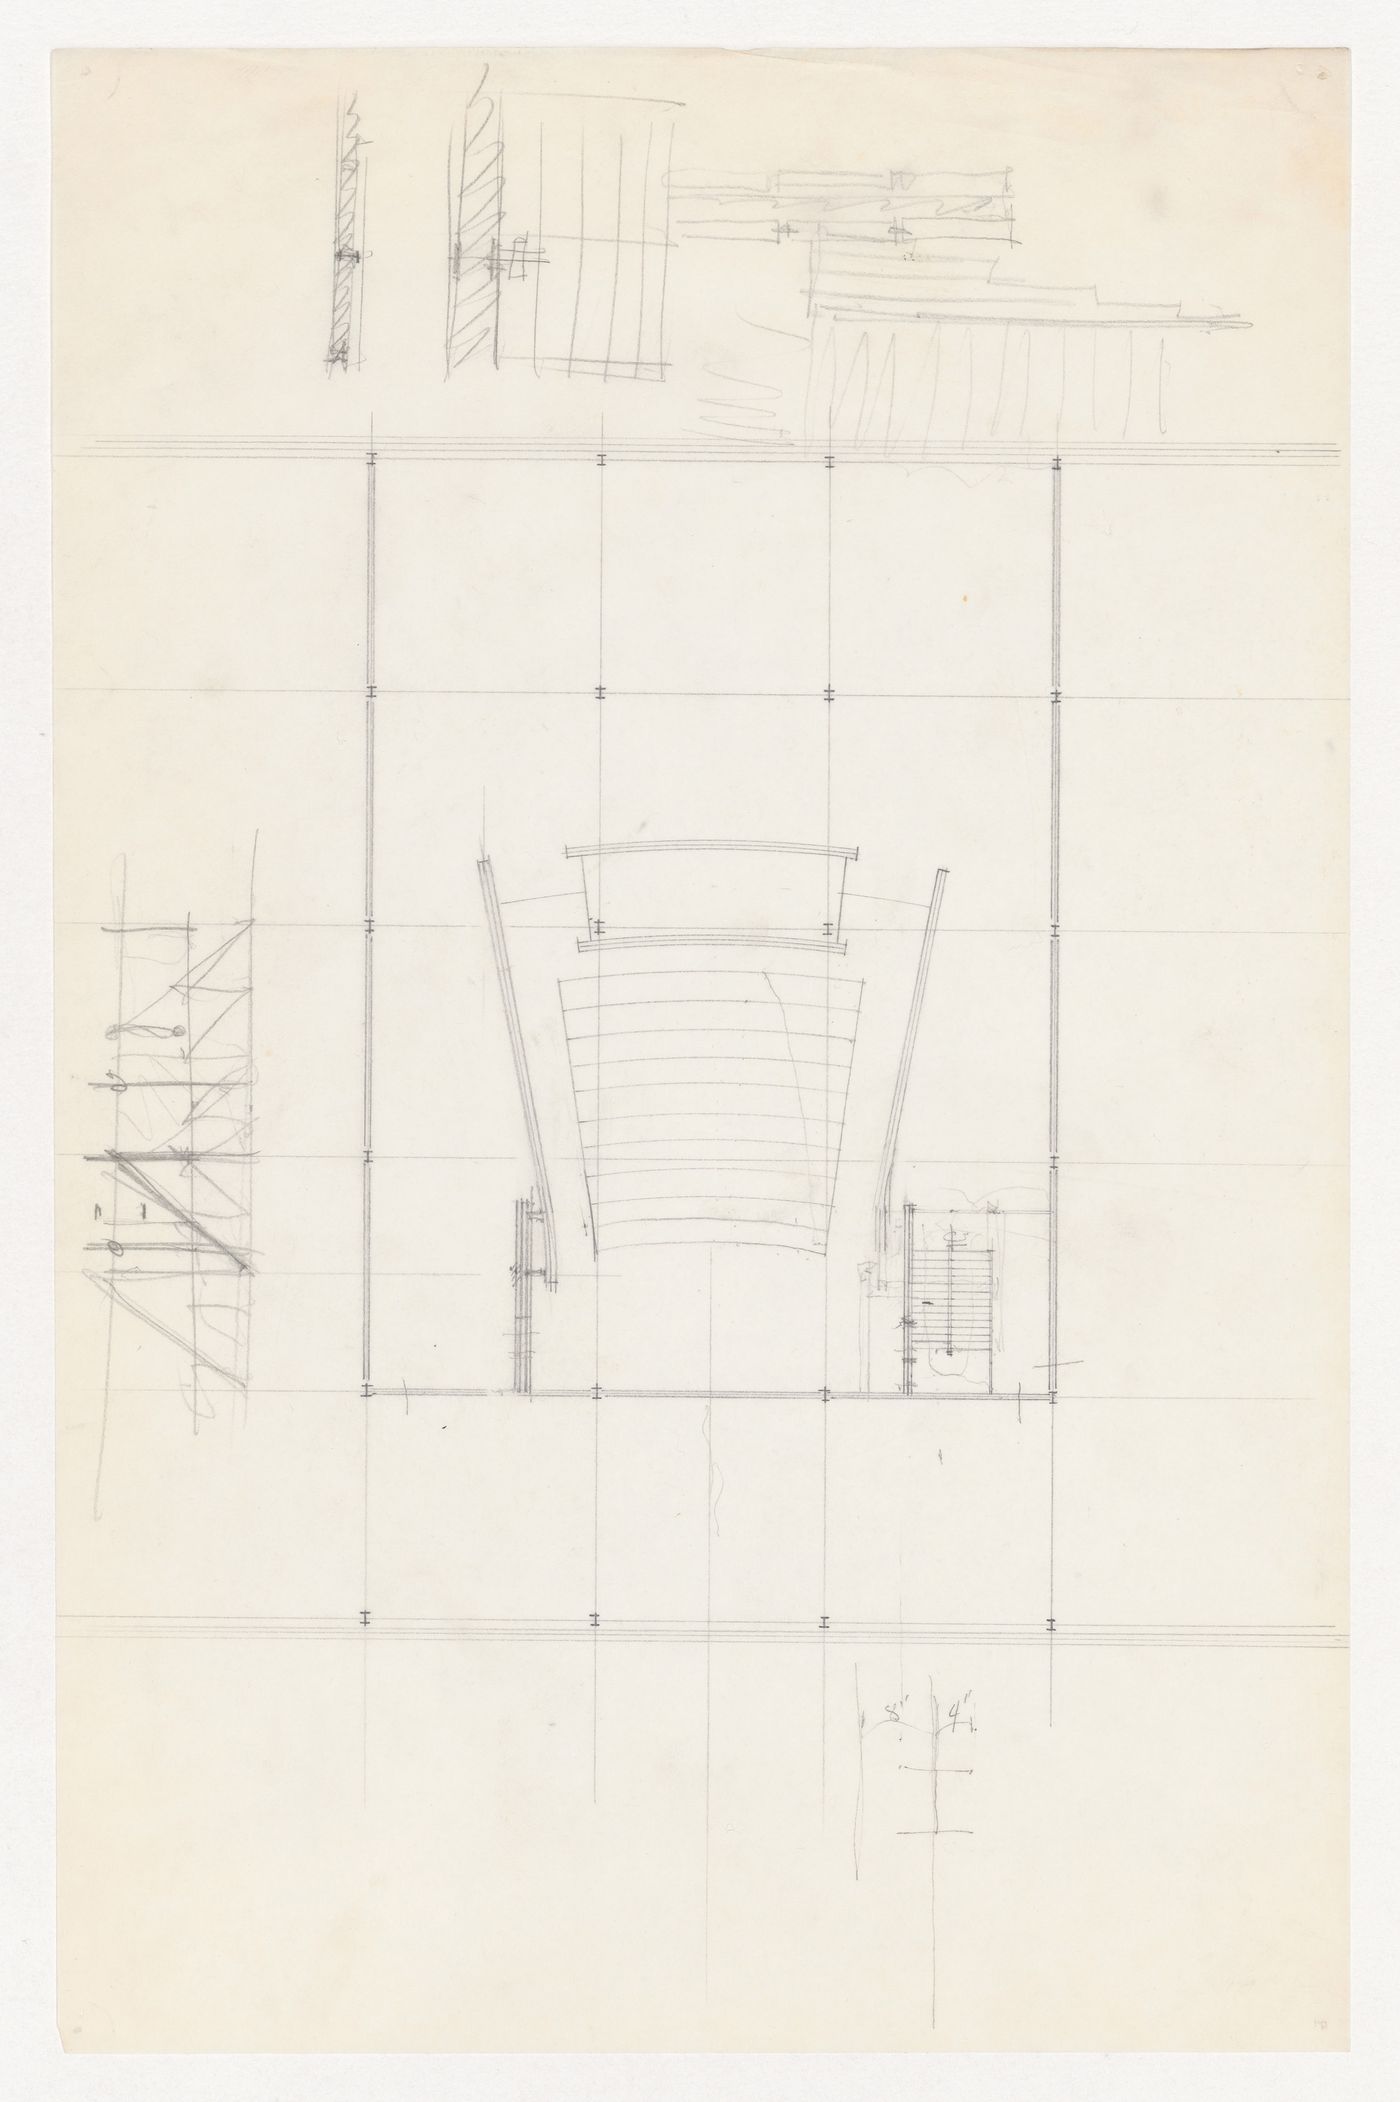 Plan for an auditorium and sketch elevations for the Metallurgy Building, Illinois Institute of Technology, Chicago